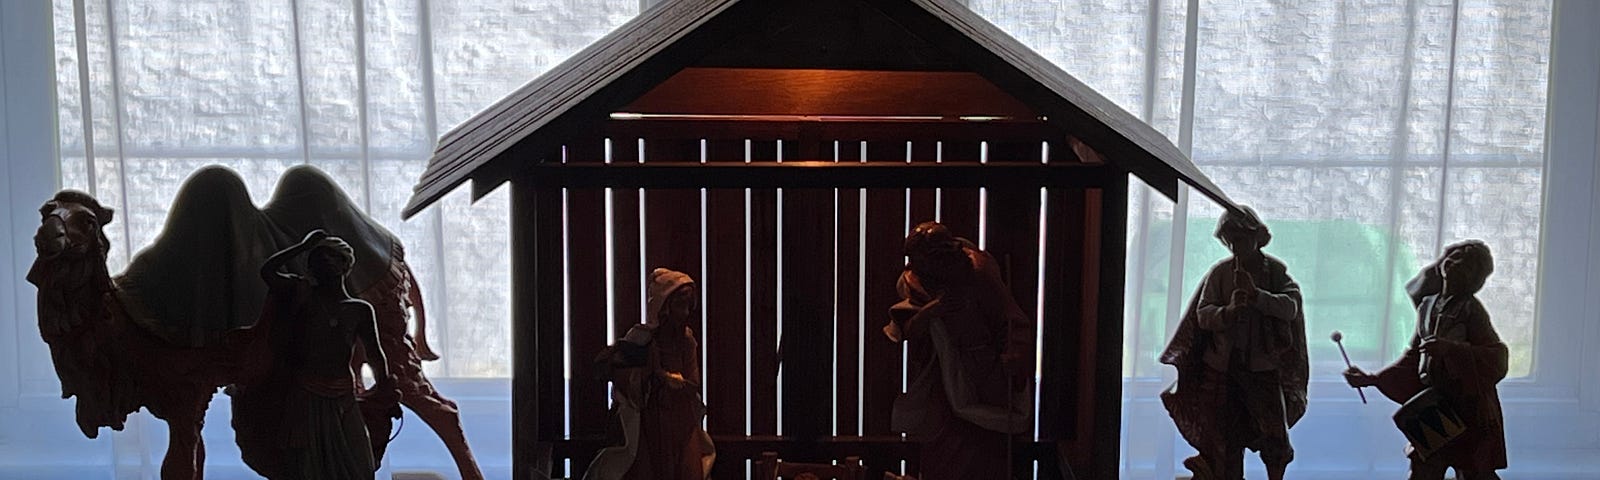 A picture of a nativity scene including a creche built by the author